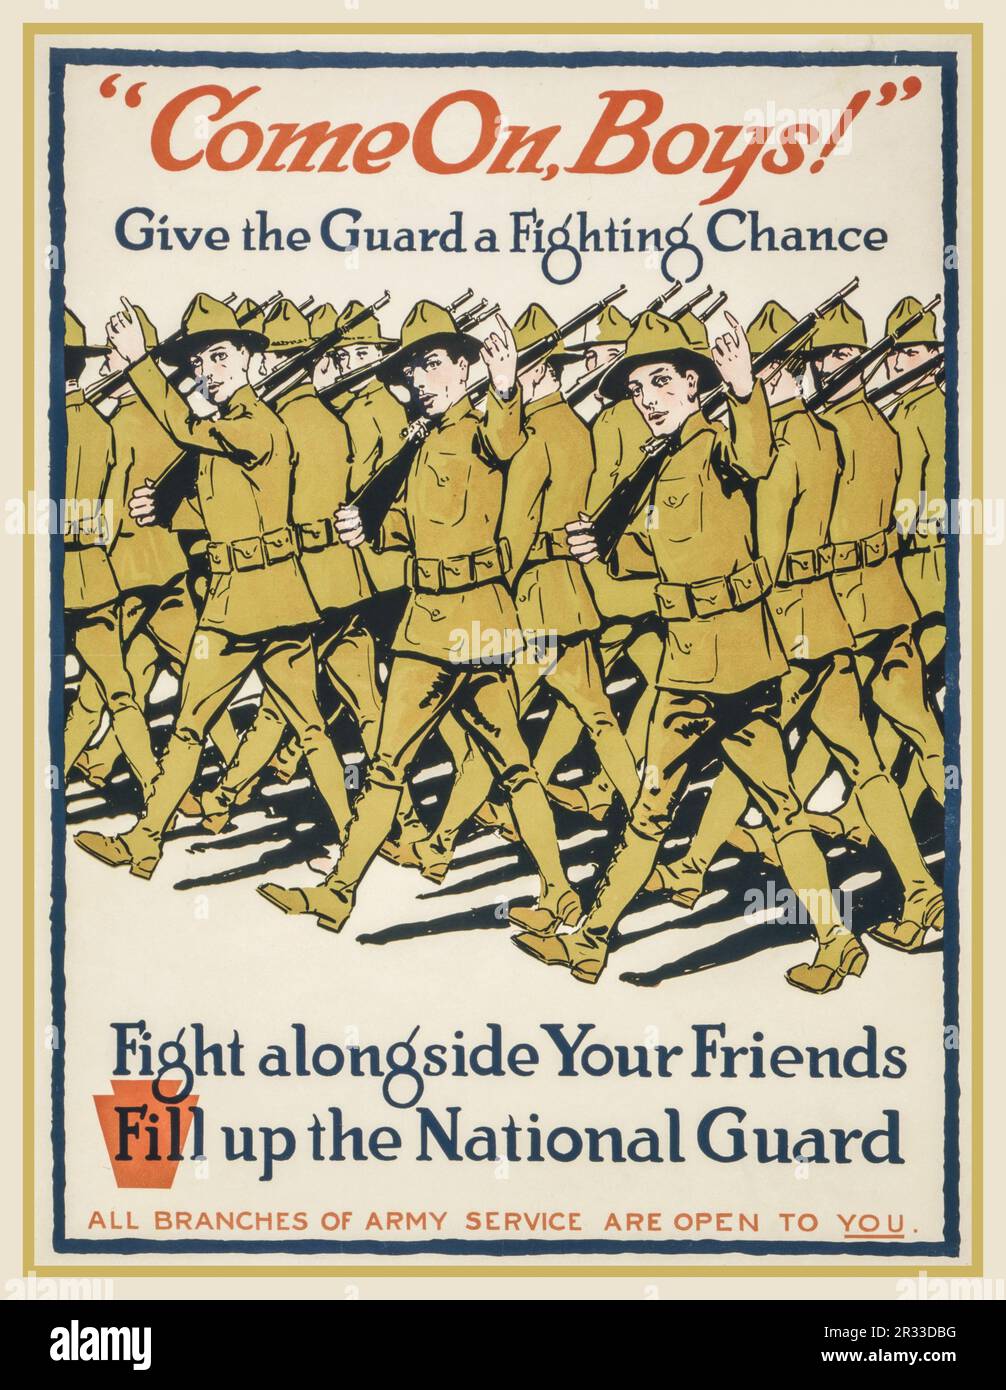 Vintage WW1 USA Recruiting Poster ' COME ON BOYS, give the Guard a Fighting Chance'  Fight alongside Your Friends Fill up the National Guard. World War 1 First World War America USA 1914-1918 Stock Photo